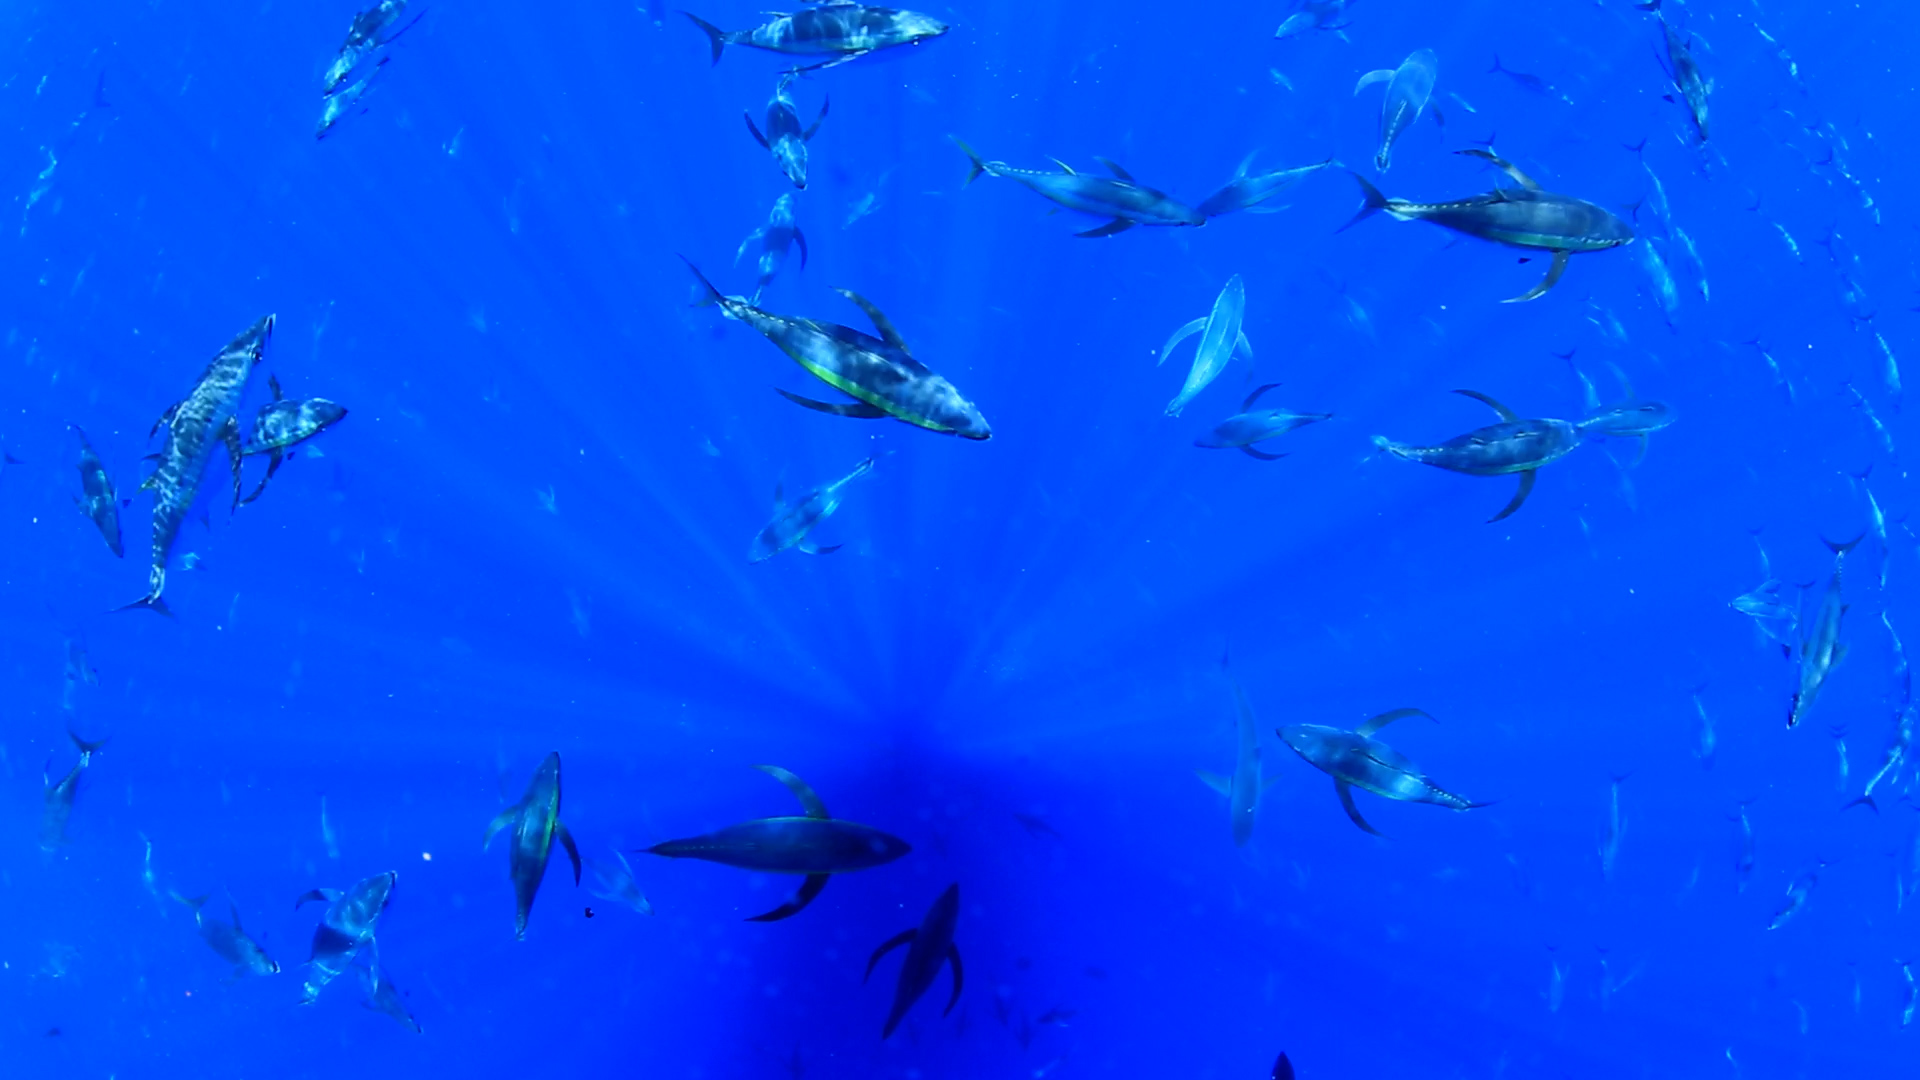 Aerial shot of tuna swimming near surface of water